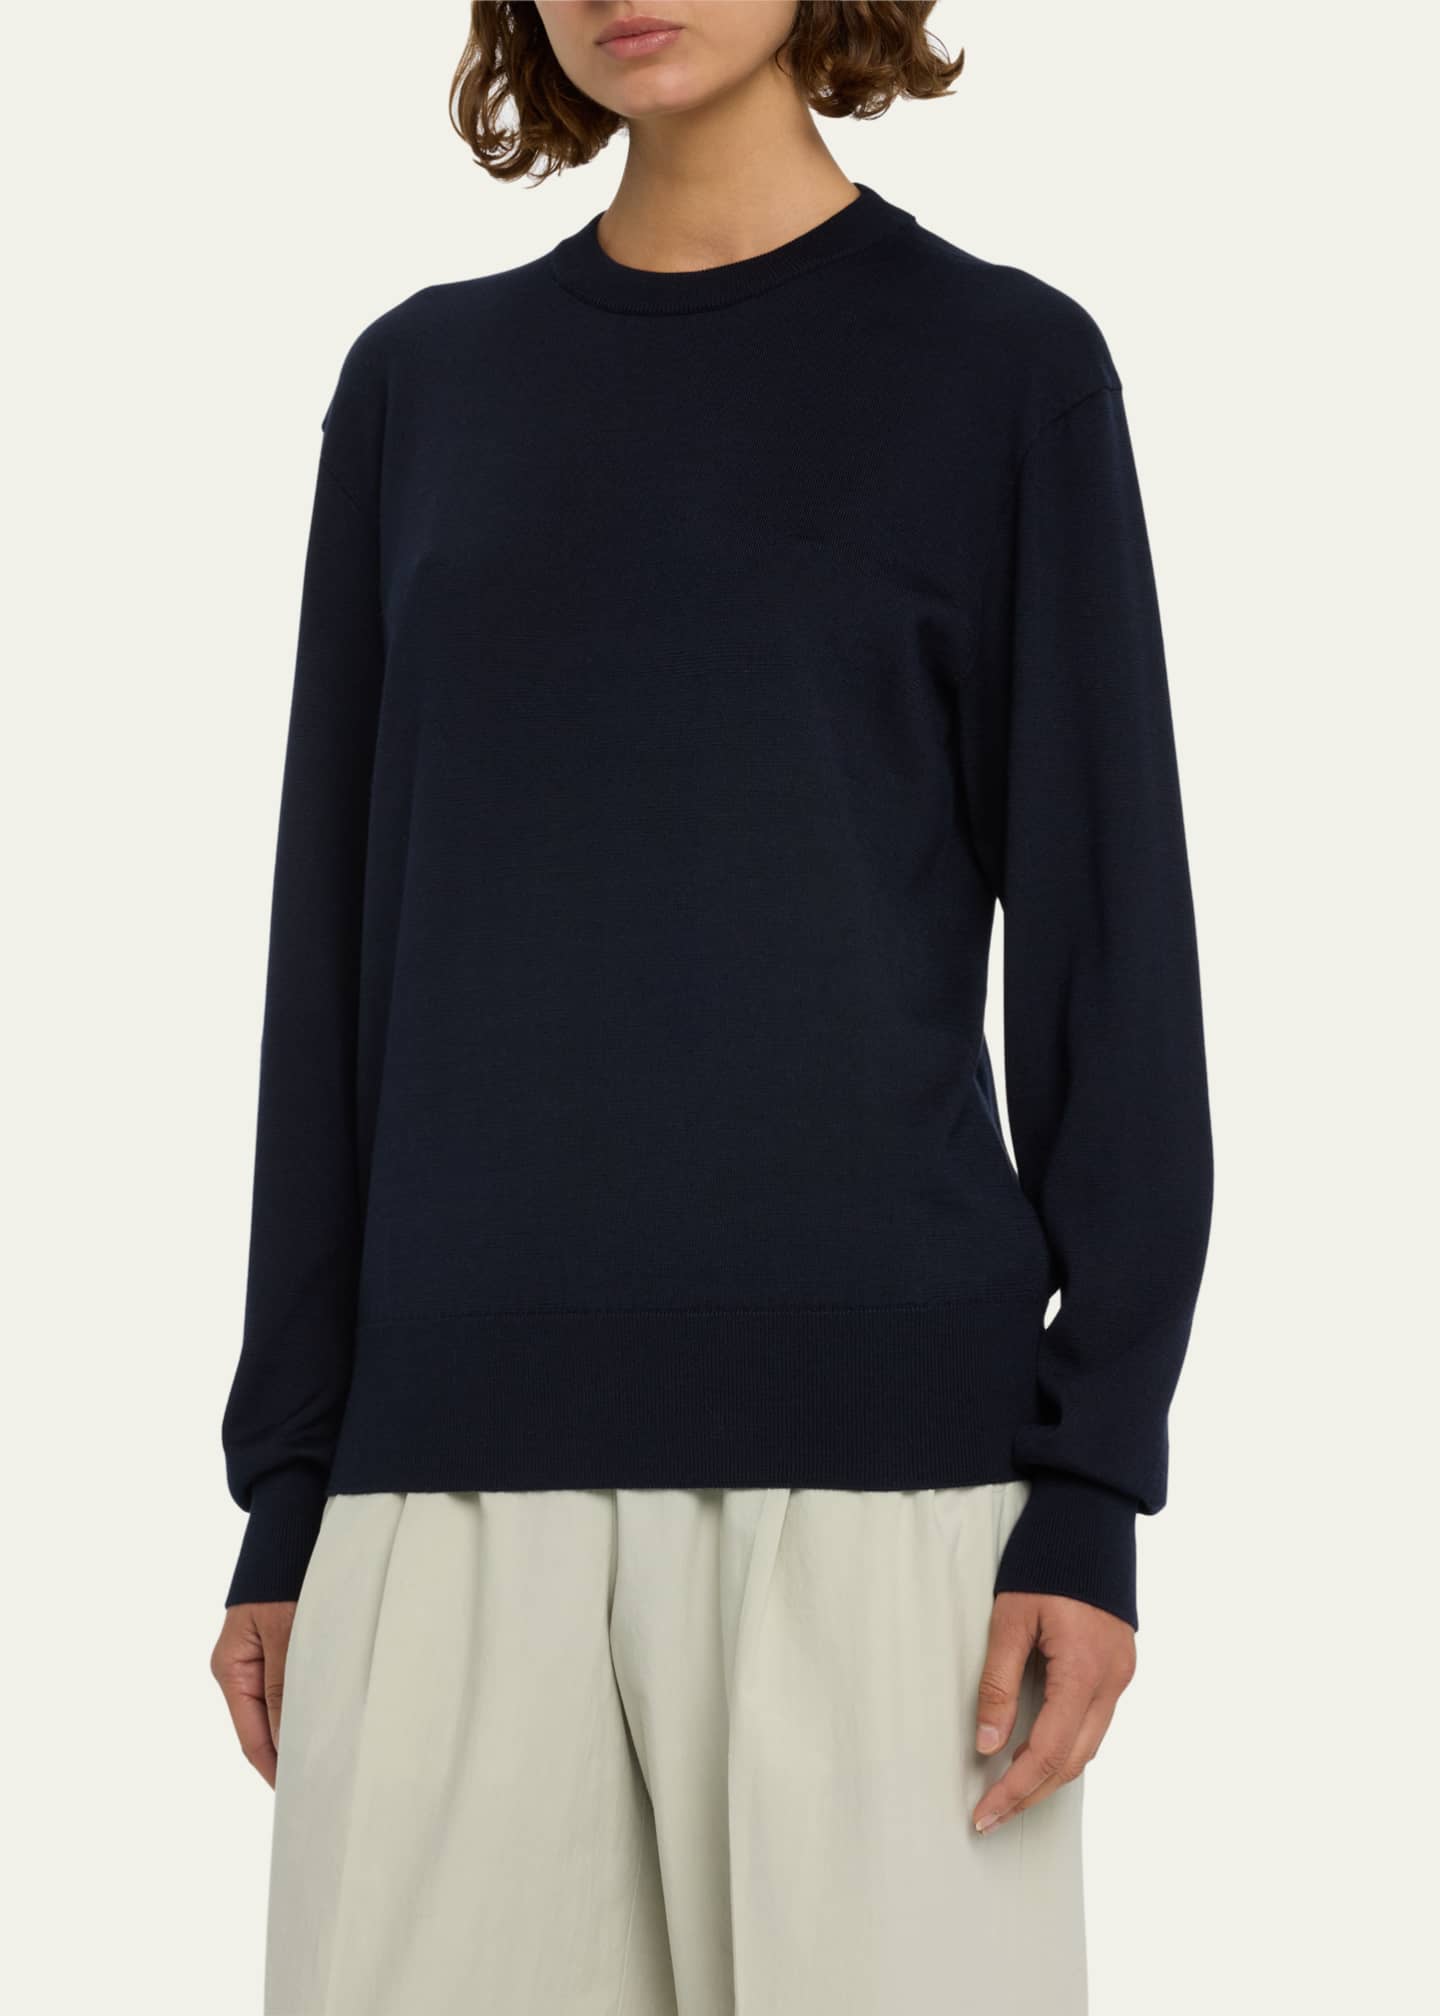 THE ROW Druyes Wool Cashmere Top - Bergdorf Goodman